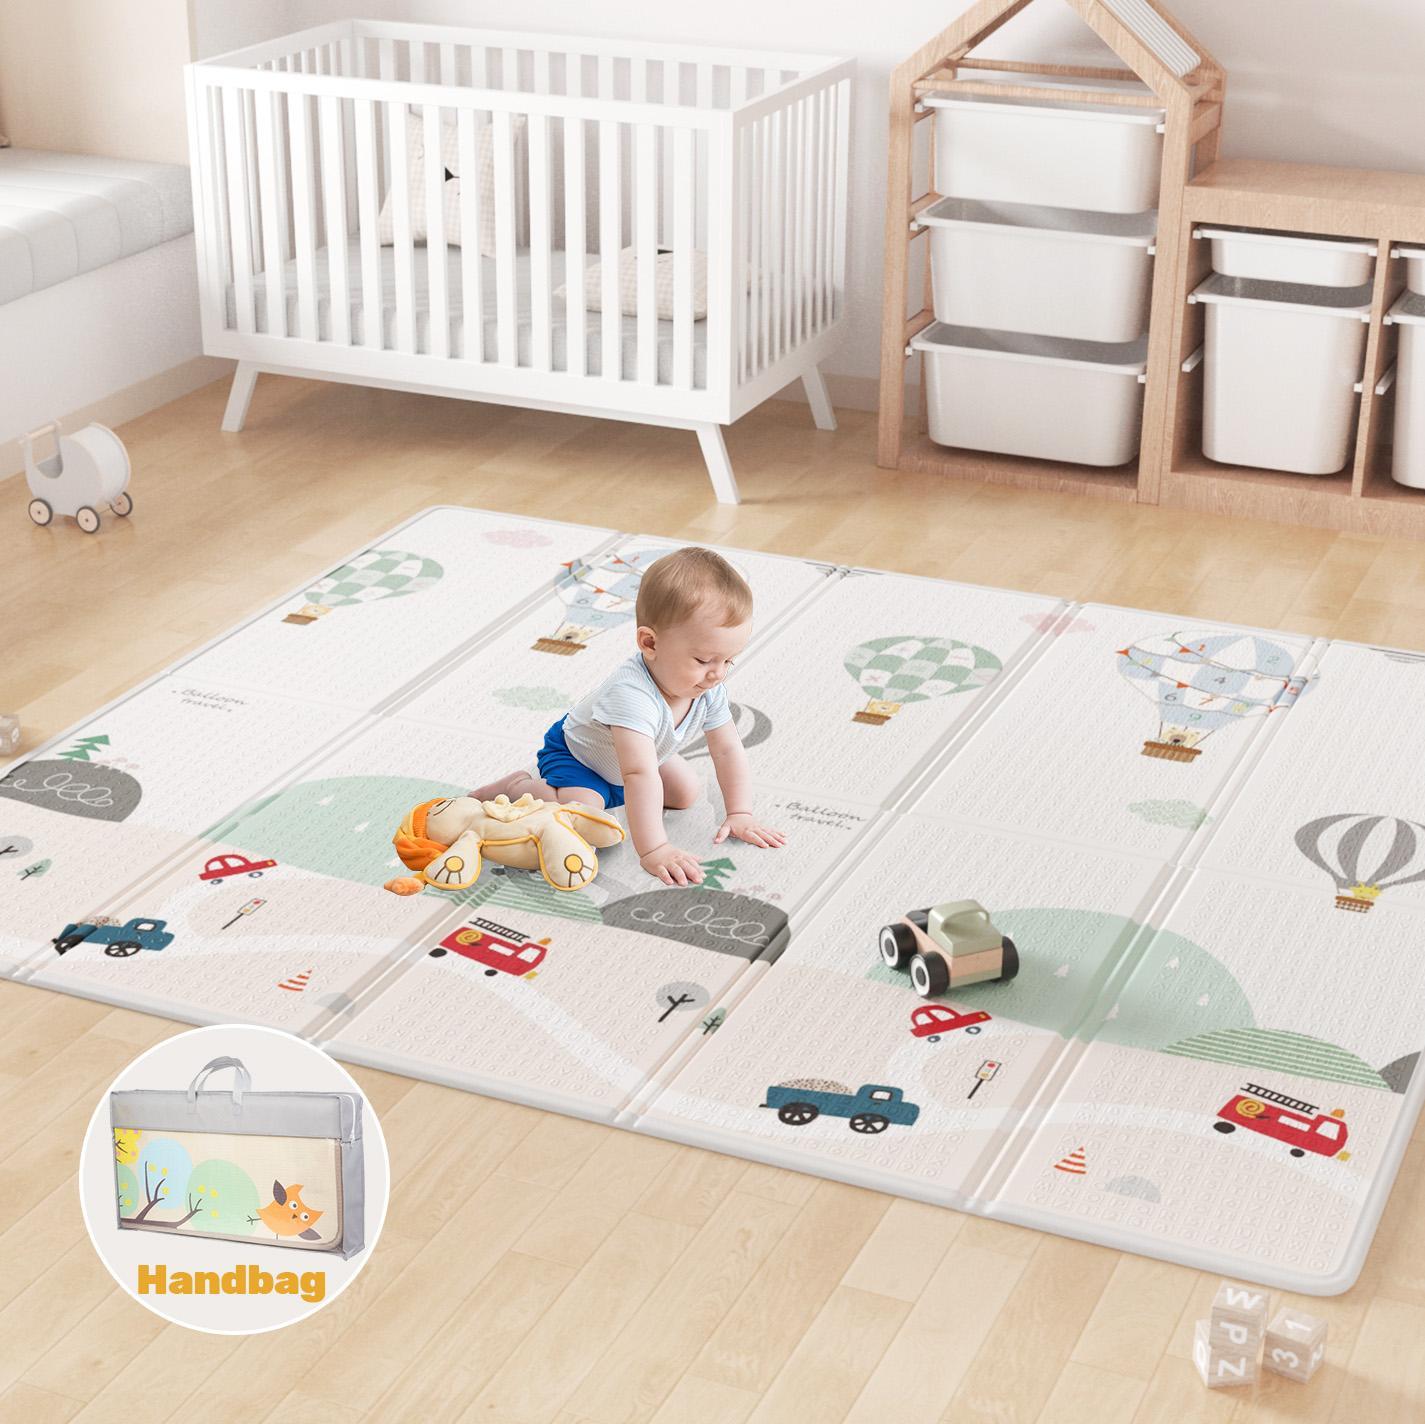 Advwin Foldable Baby Play Mat 180*200*1cm Extra Large Waterproof Activity Playmats Foam Crawling Mat with Travel Bag